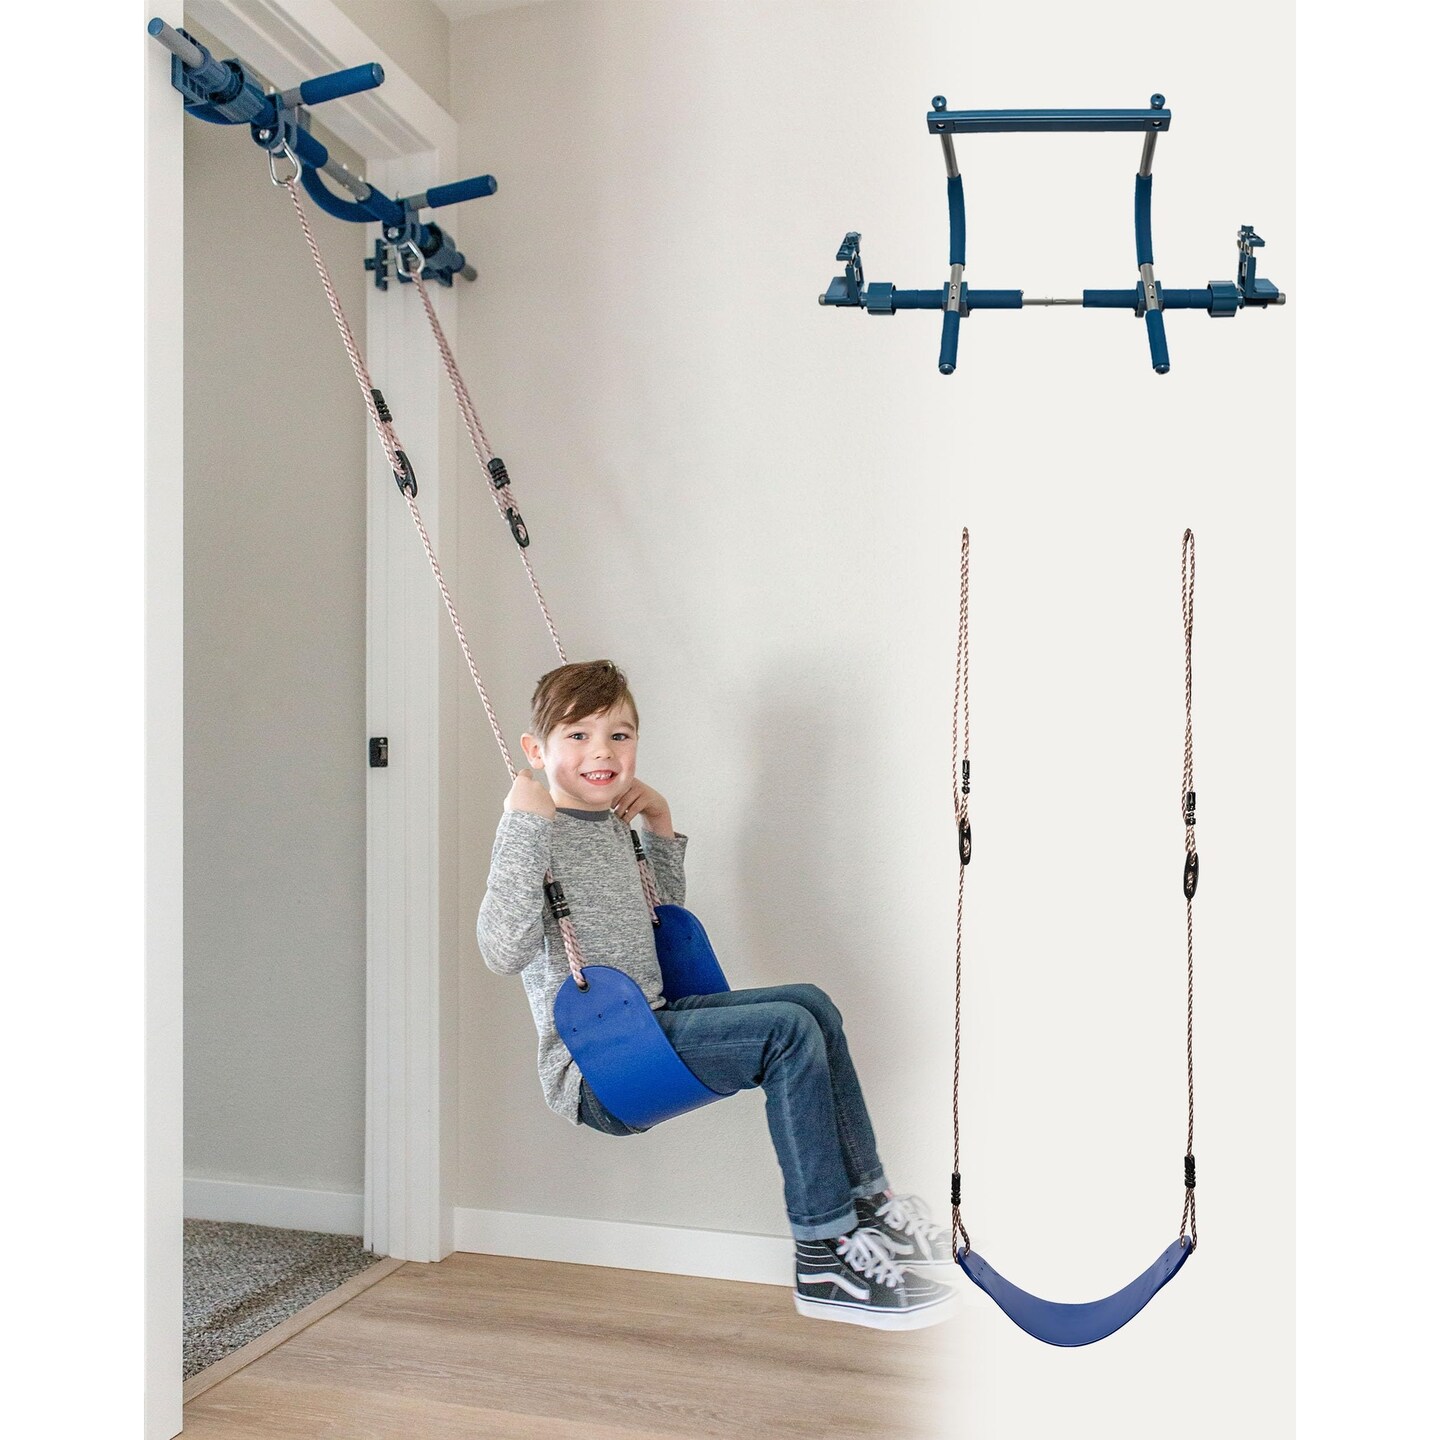 Gym1 2-Piece Doorway Swing Set Includes Sensory Swing for Kids, Indoor Pull Up Bar for Adults for Indoor Fun &#x26; Fitness, Holds Up to 300 Lbs, Blue